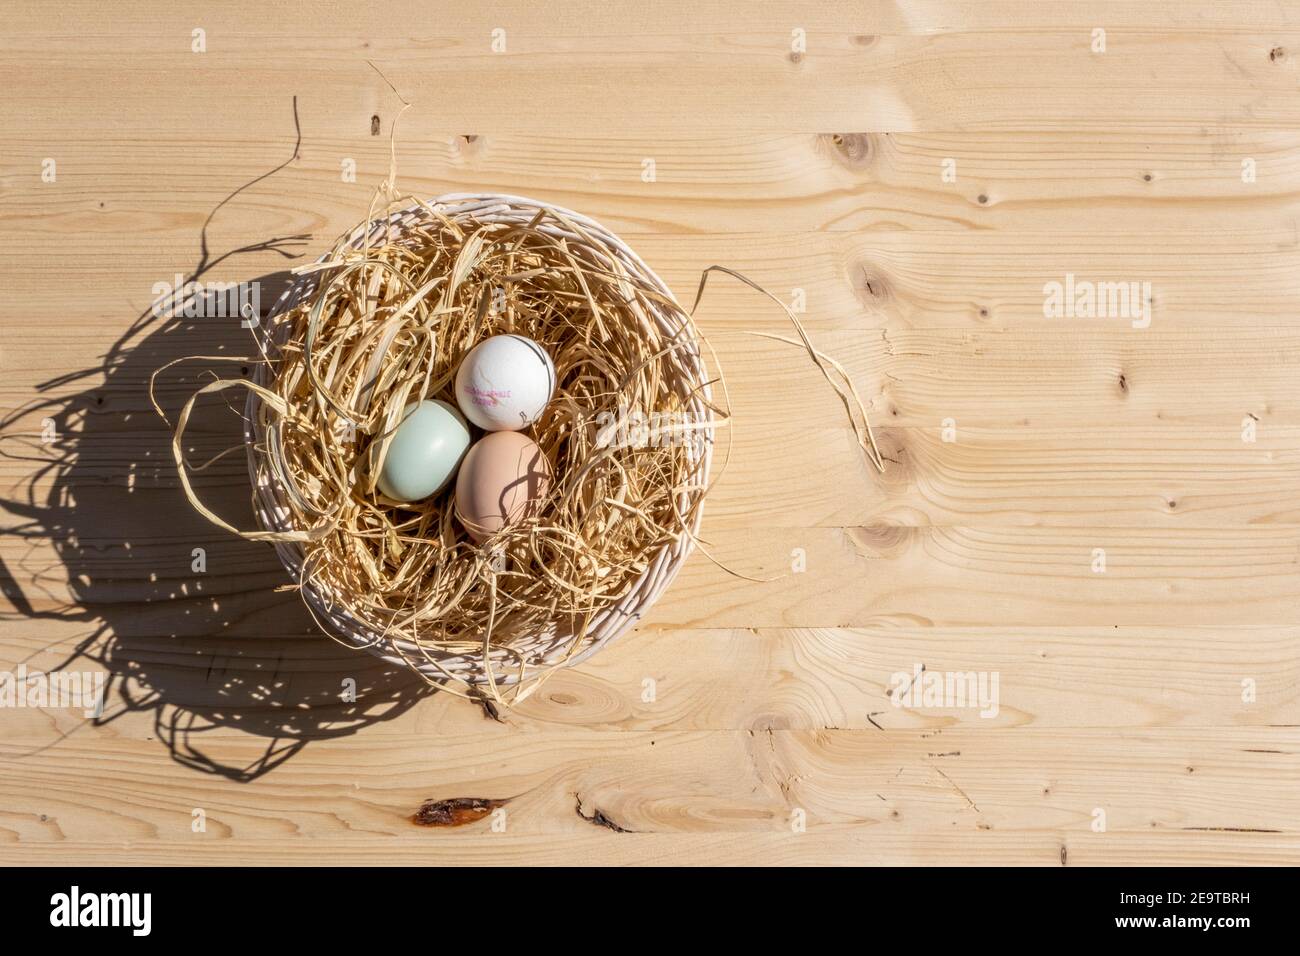 Organic Easter concept: Top view on a basket filled with straw and three natural colored eggs. Sun light creates shadow on wooden table surface. Stock Photo